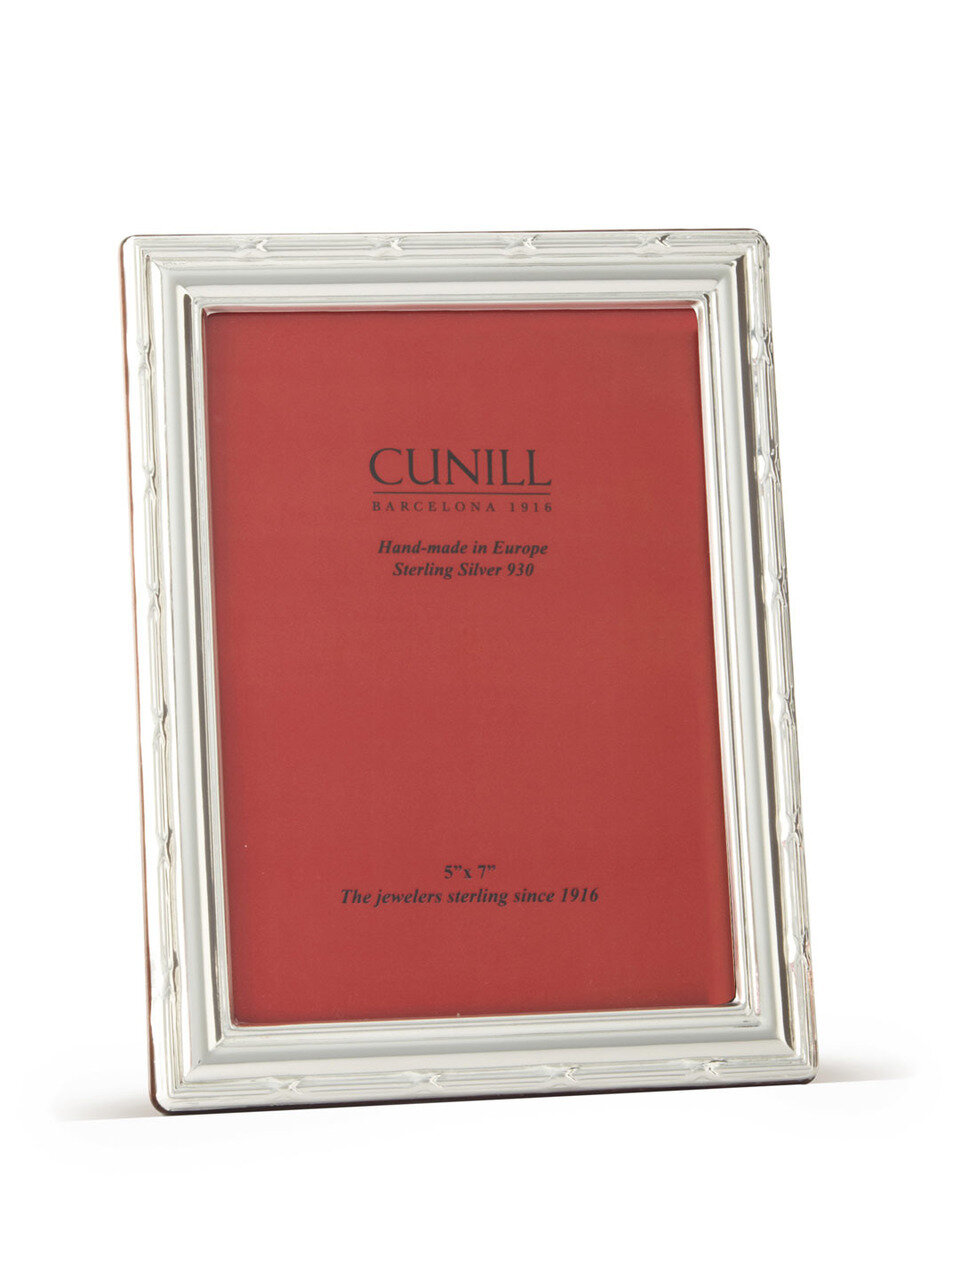 Cunill Ribbon 8 x 10 Inch Picture Frame - Sterling Silver